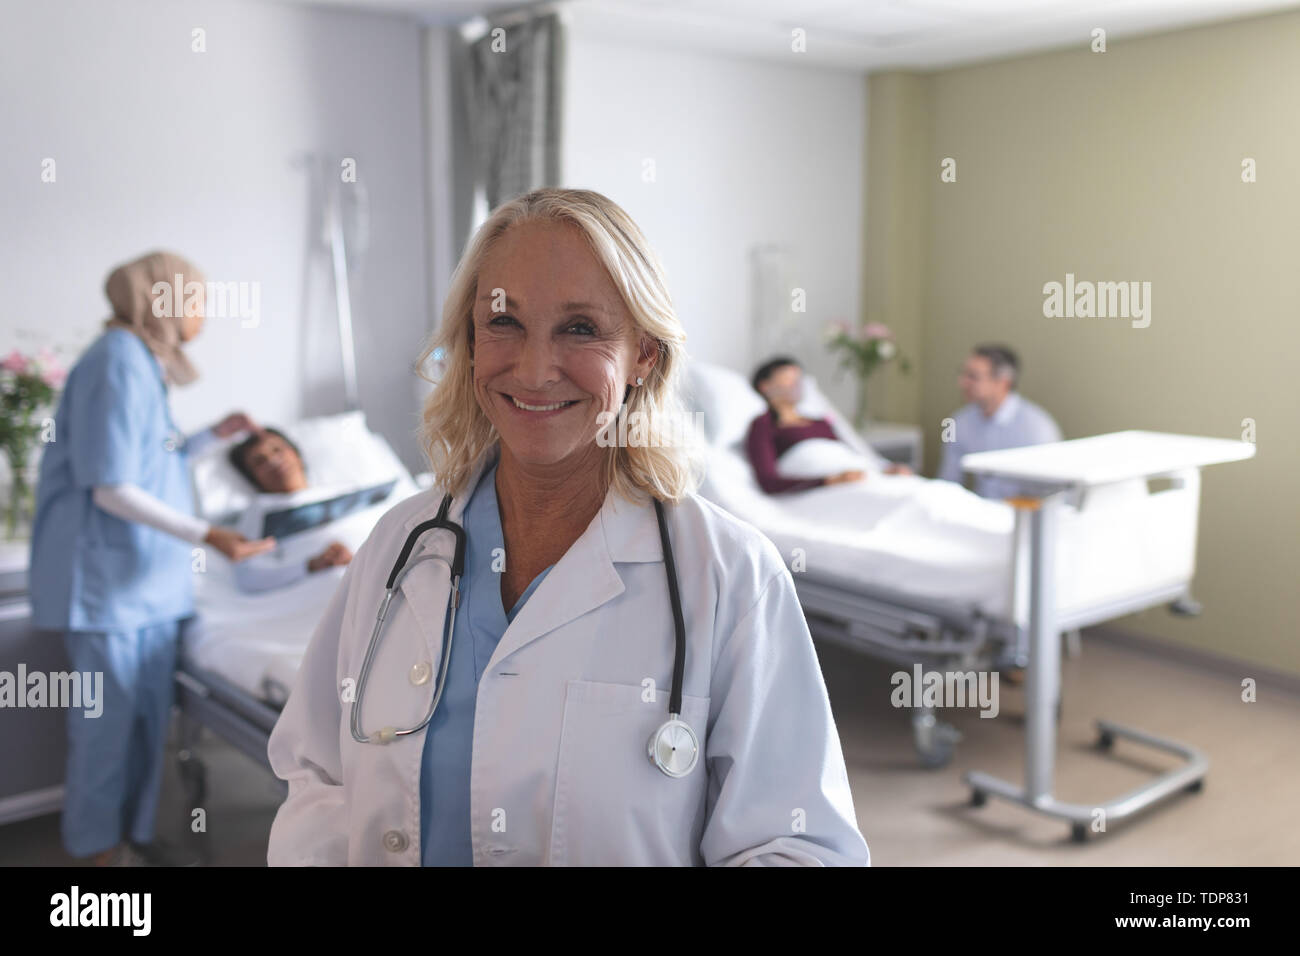 Female doctor smiling in the ward at hospital Stock Photo